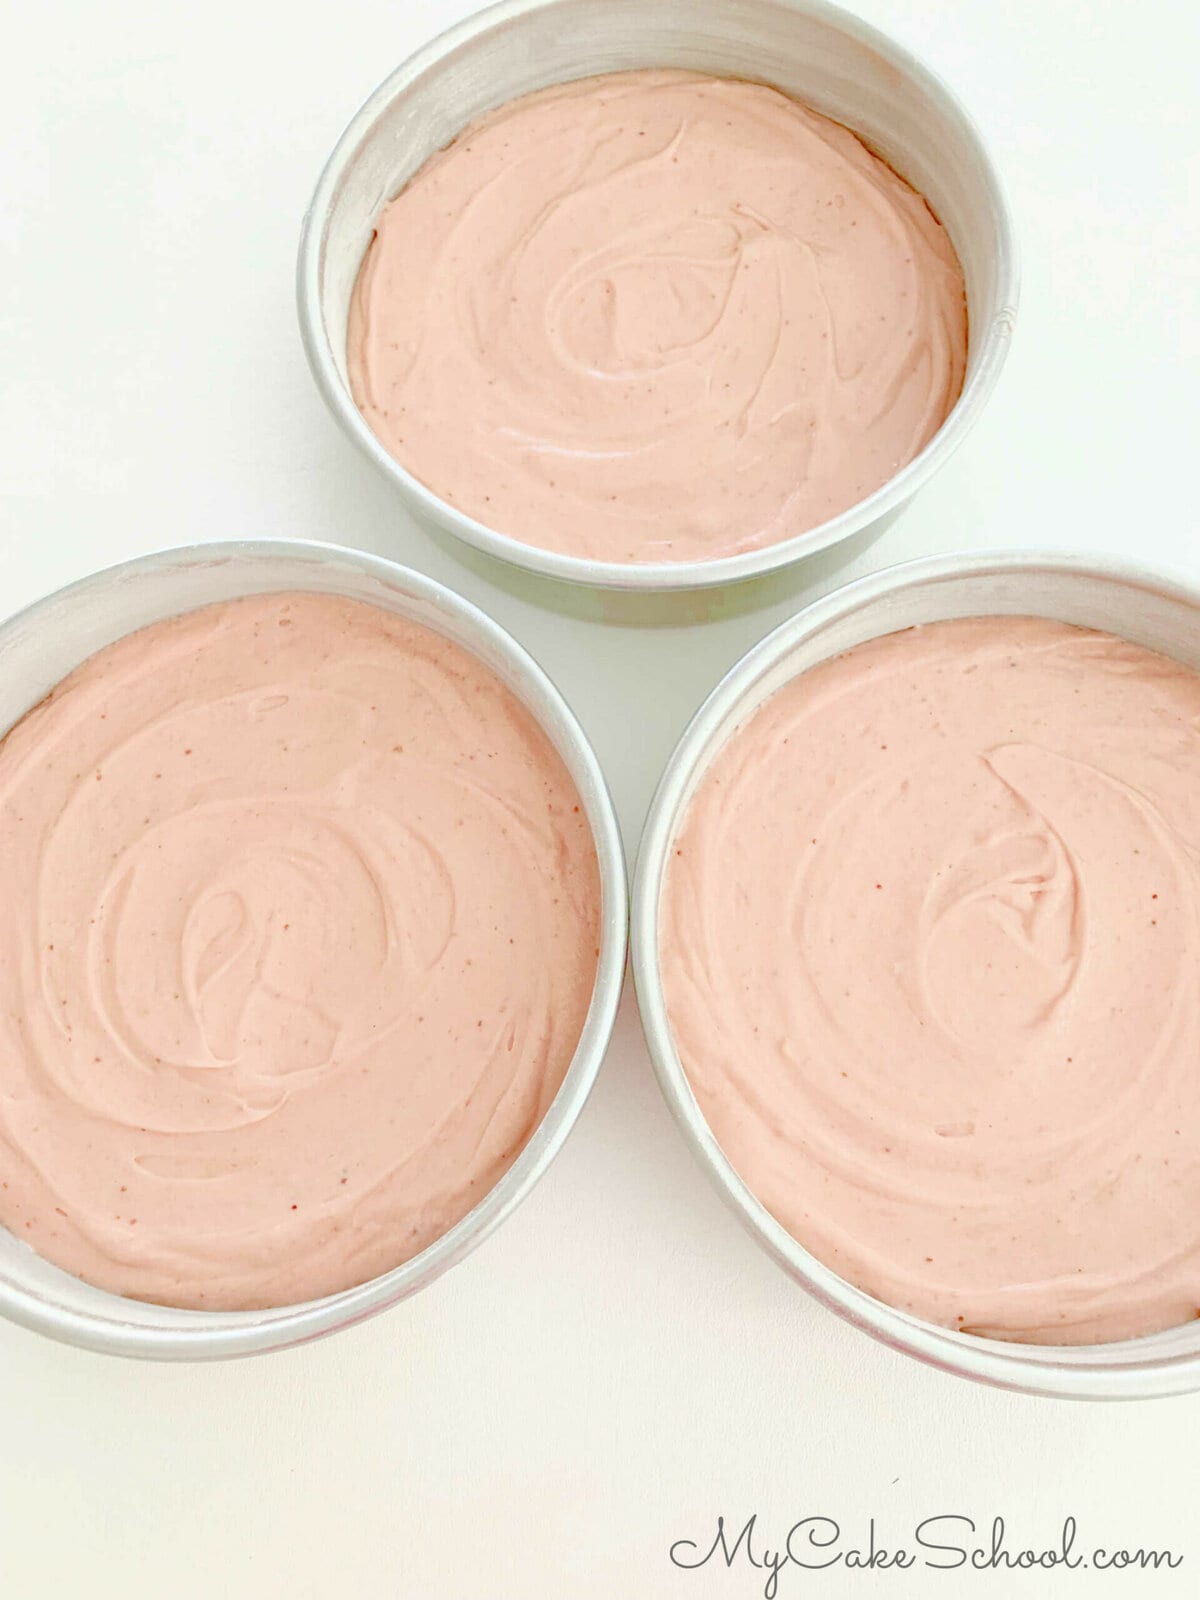 Three cake pans filled with pink cake batter